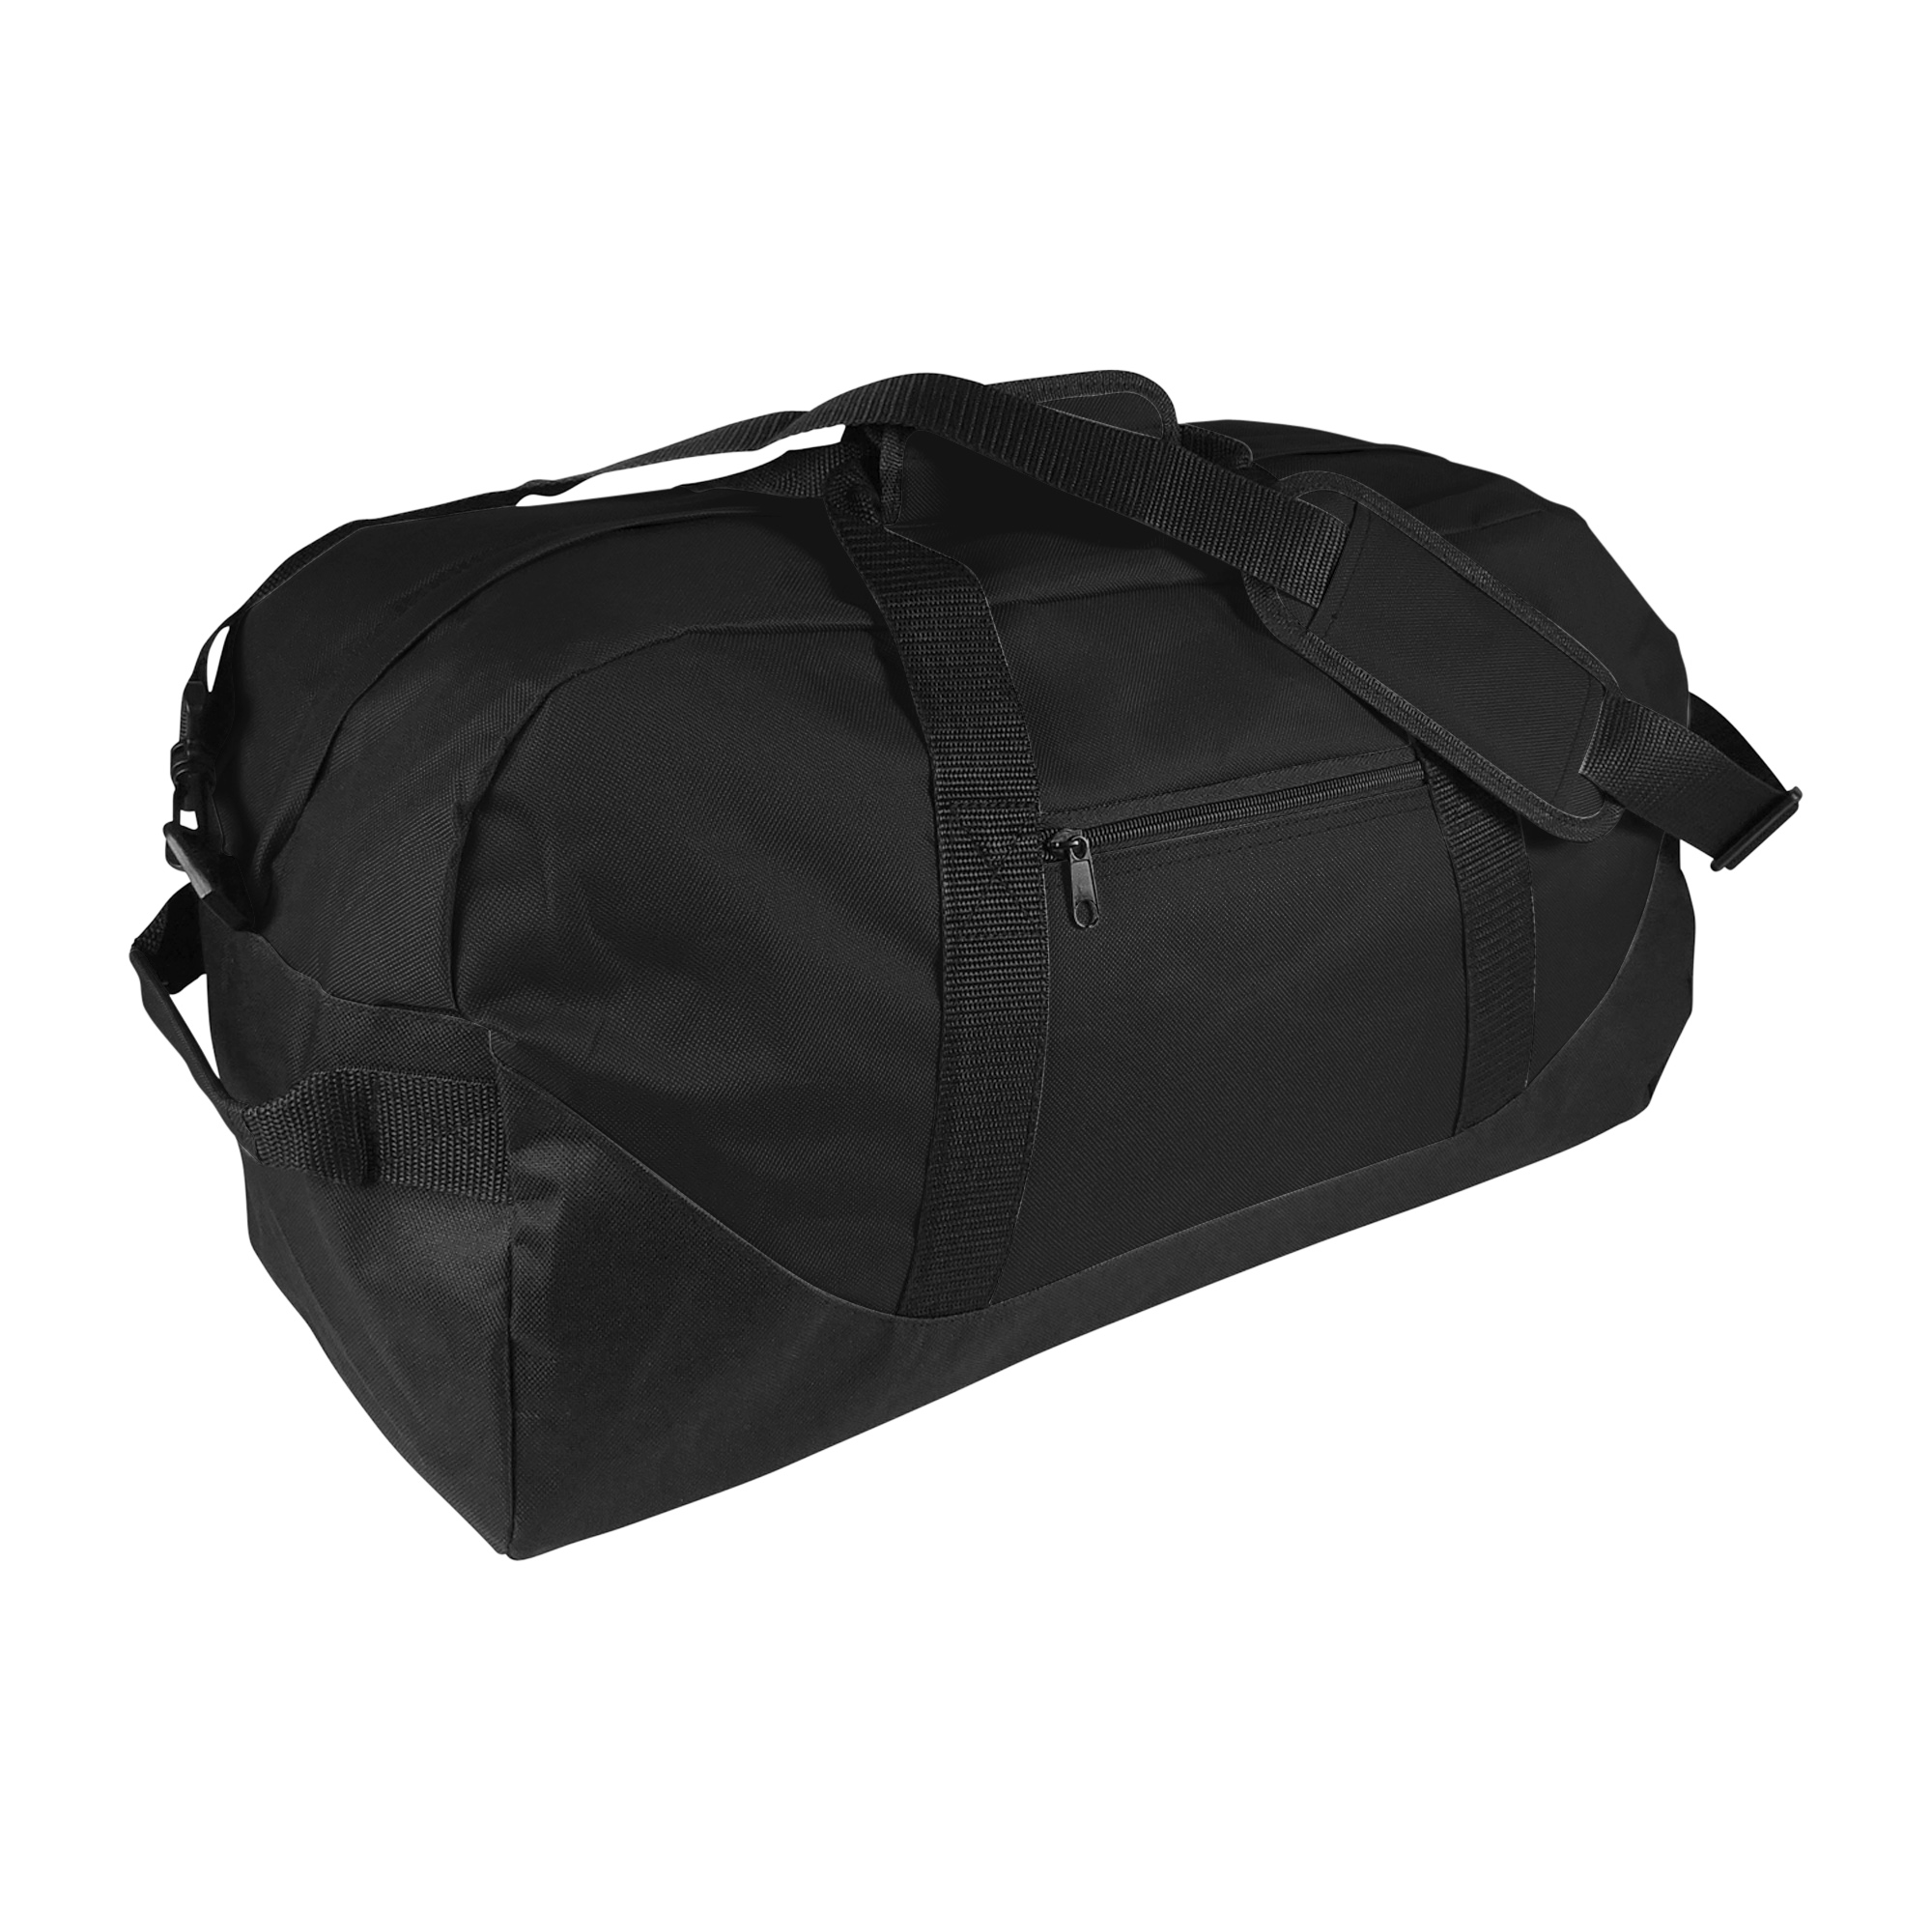 21 Large Duffle Bag with Adjustable Strap in Black - image 1 of 4